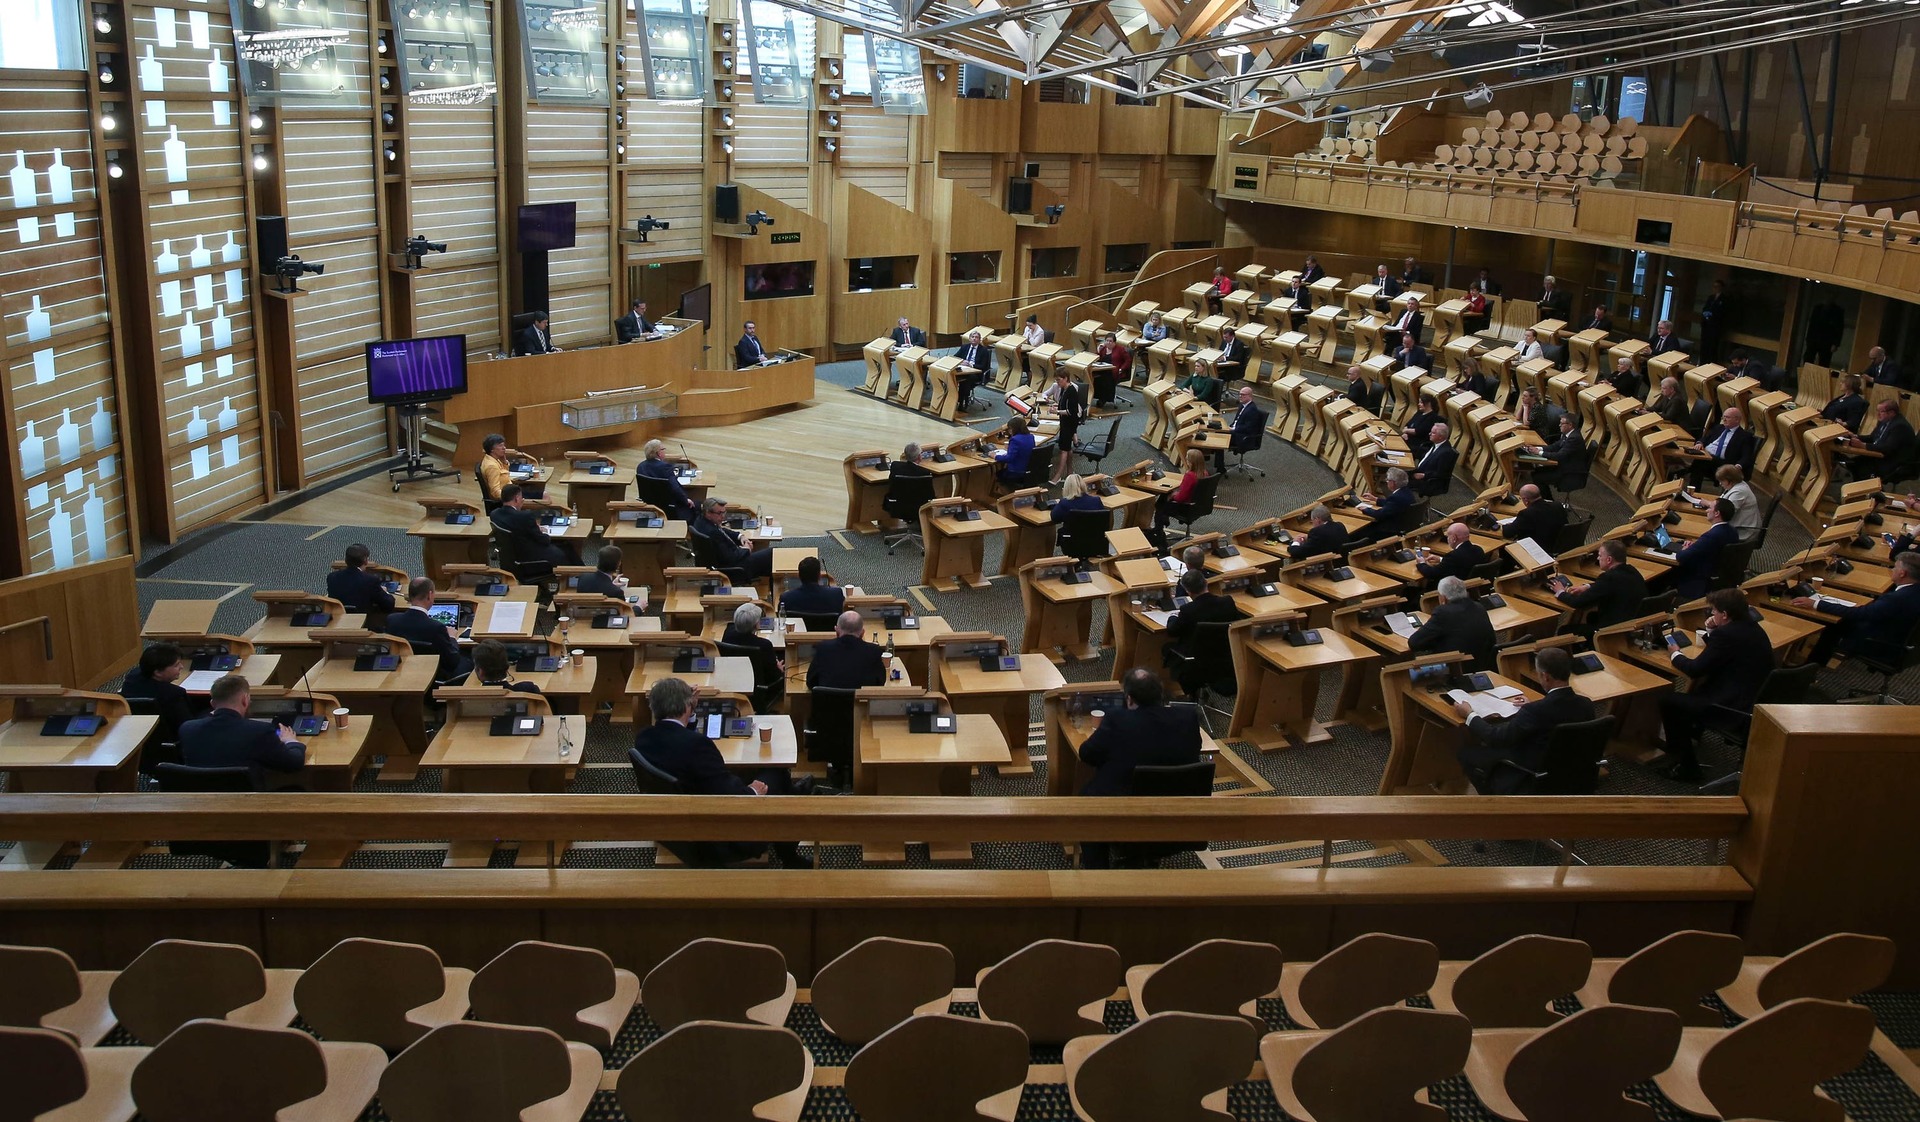 Social distancing measures were put in place in Holyrood during the pandemic (Fraser Bremner/PA).